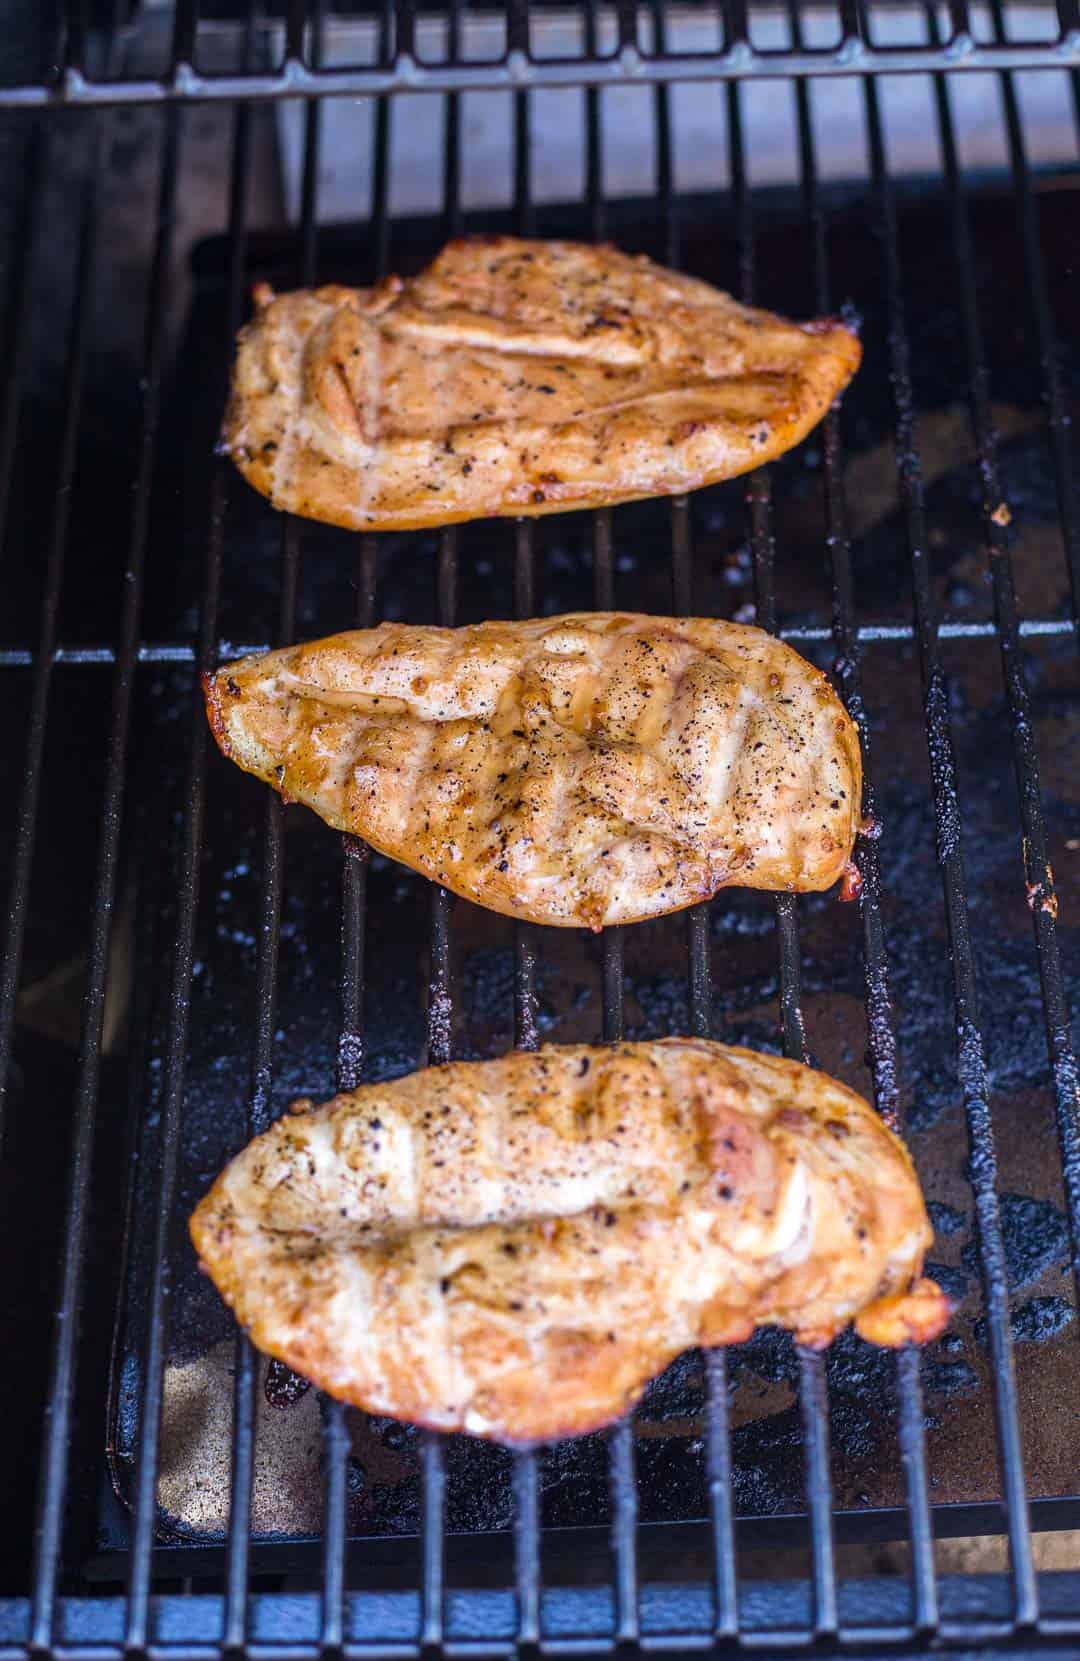 Teriyaki marinated chicken breasts cooking on the grill